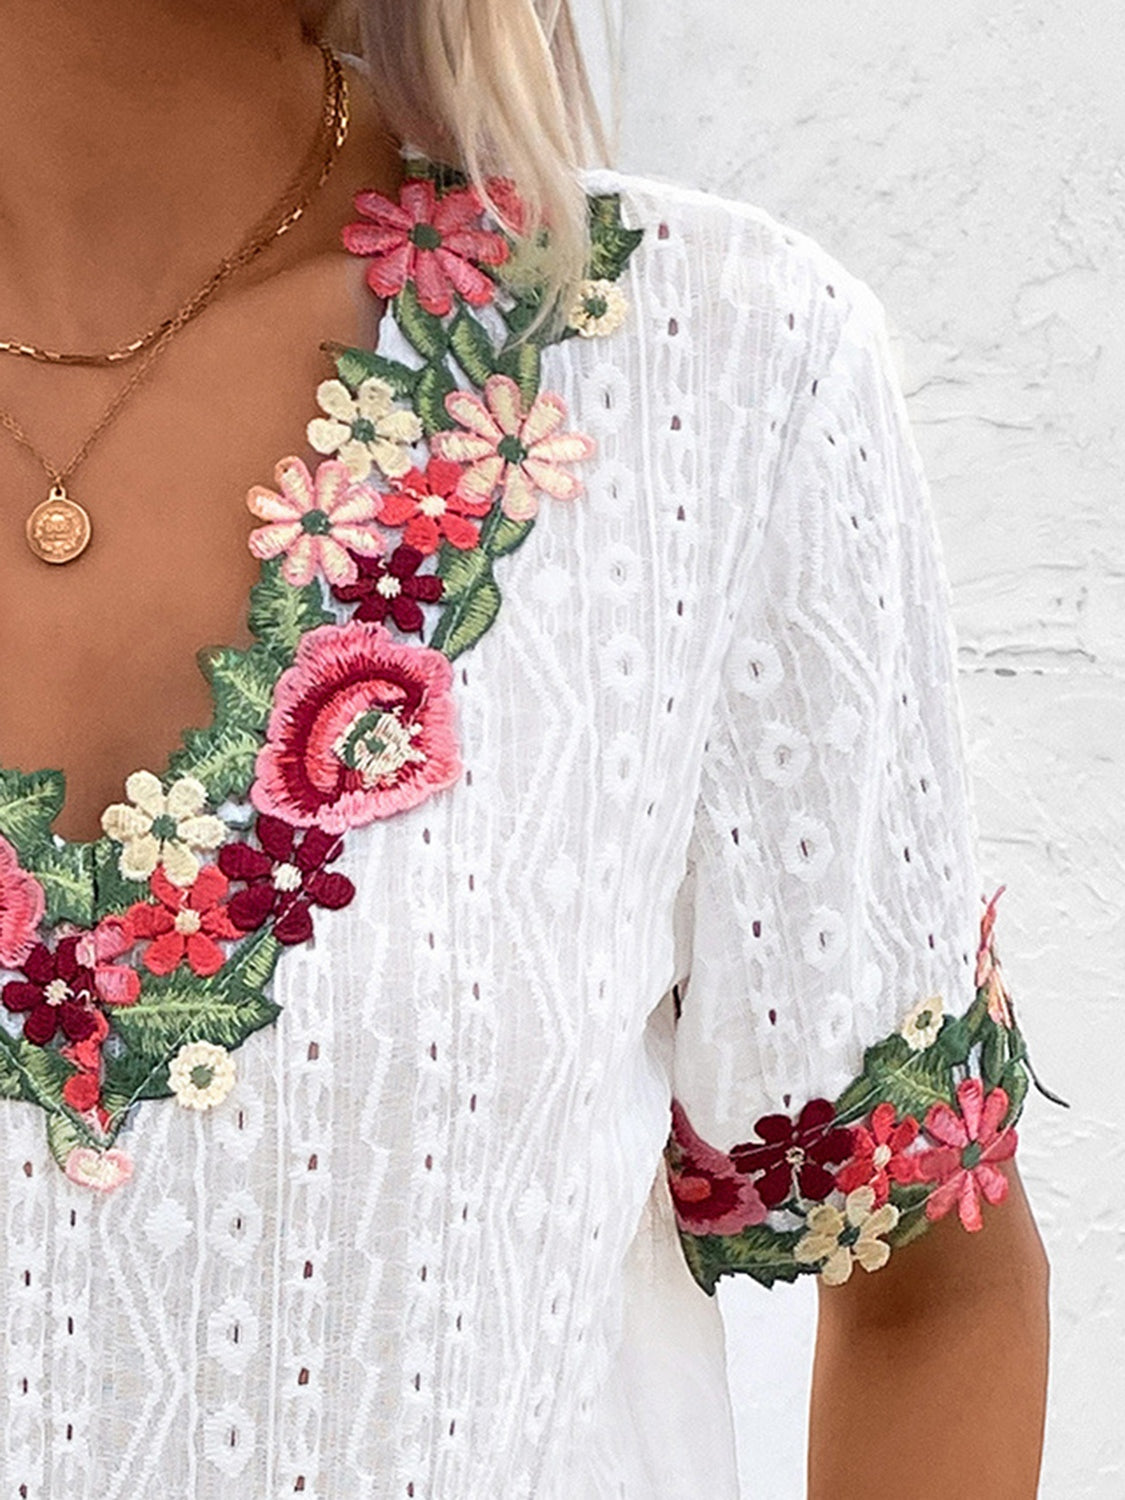 Discover the chic Eyelet Embroidered V-Neck Blouse in four colors. Perfect blend of comfort and style for any occasion. Shop now!